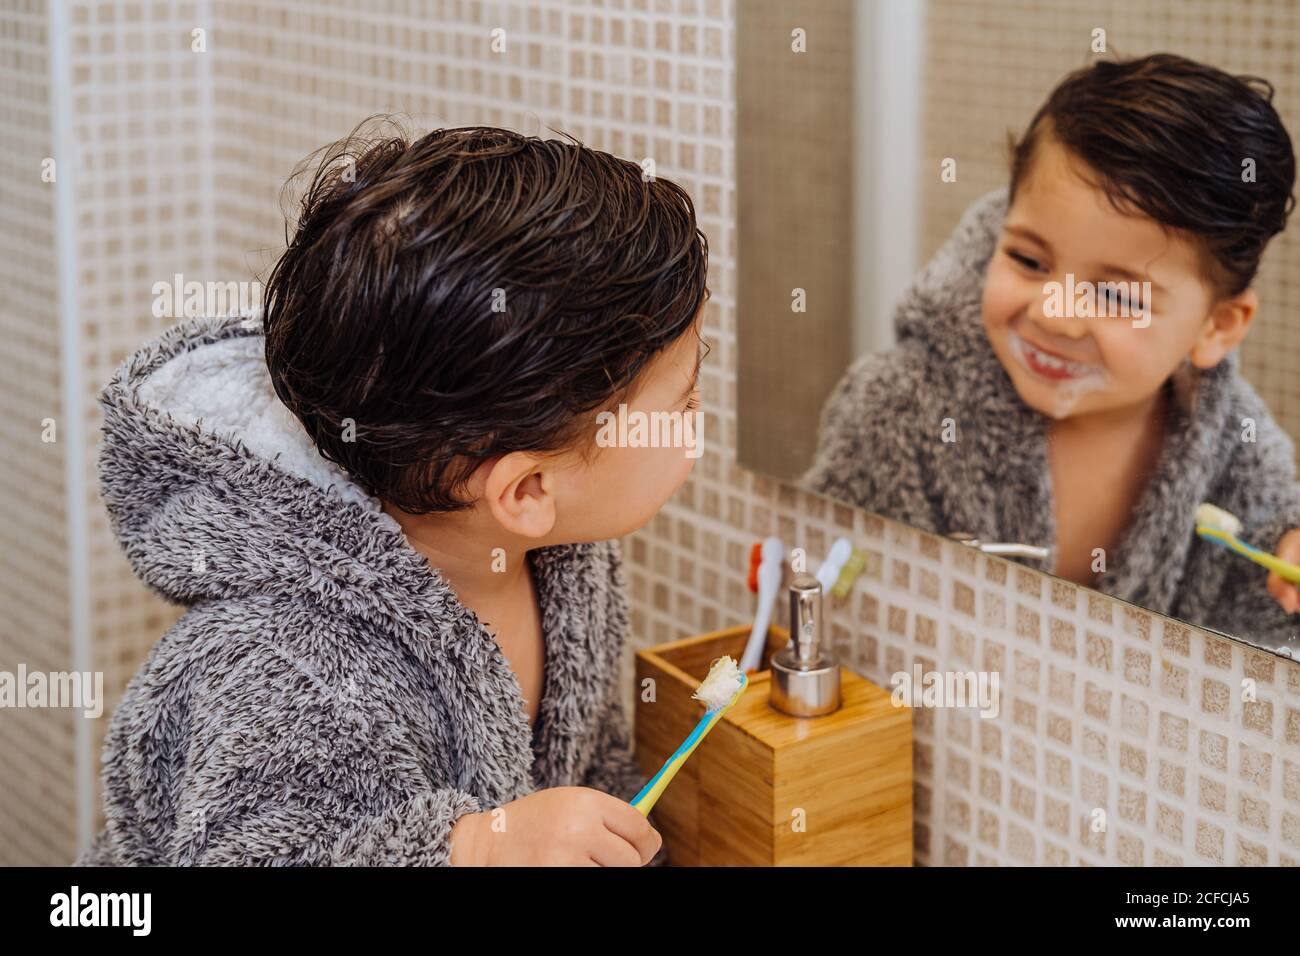 Adorable child wearing cozy bathrobe standing in bathroom with toothbrush and looking in mirror Stock Photo